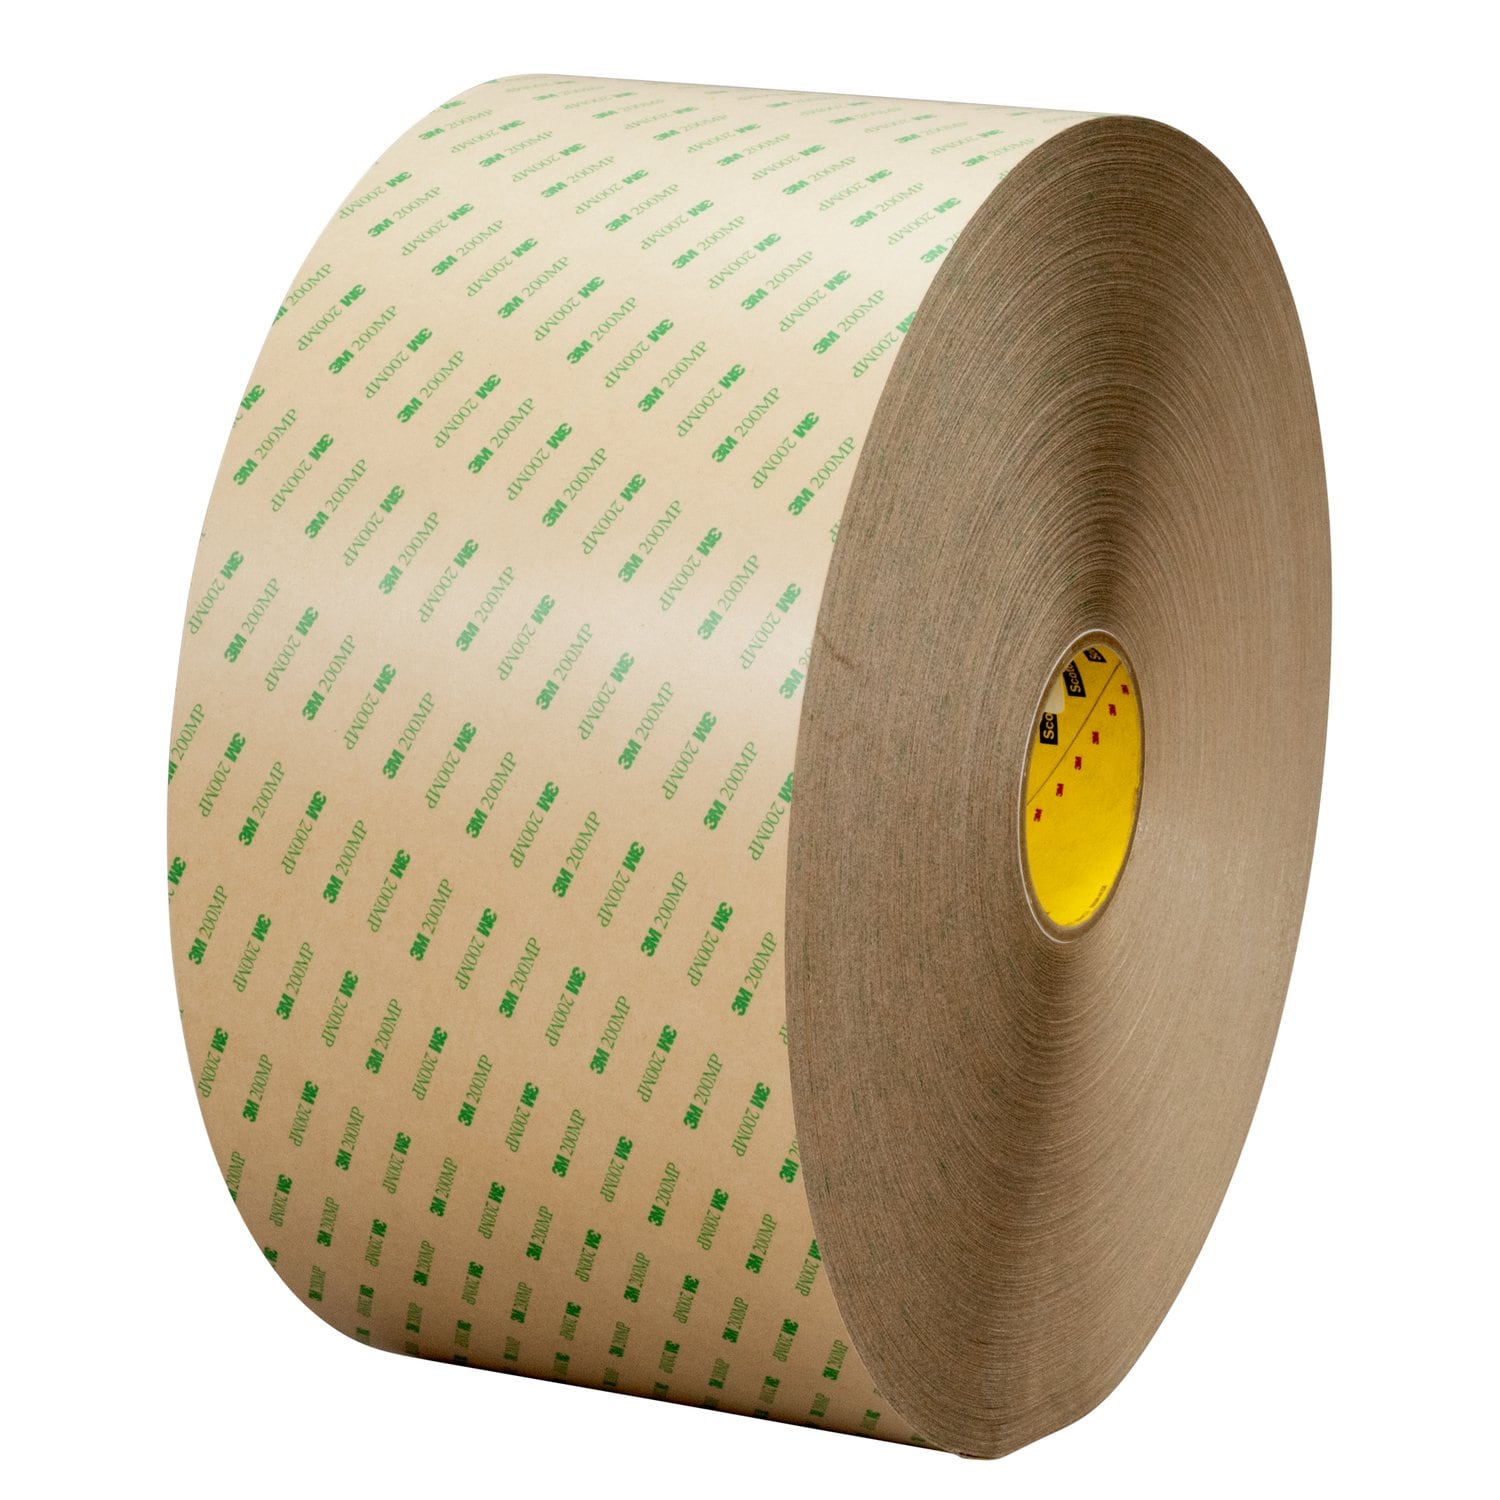 7000142765 - 3M Adhesive Transfer Tape 9668MP, Clear, 12 in x 180 yd, 5 mil, 1 roll
per case